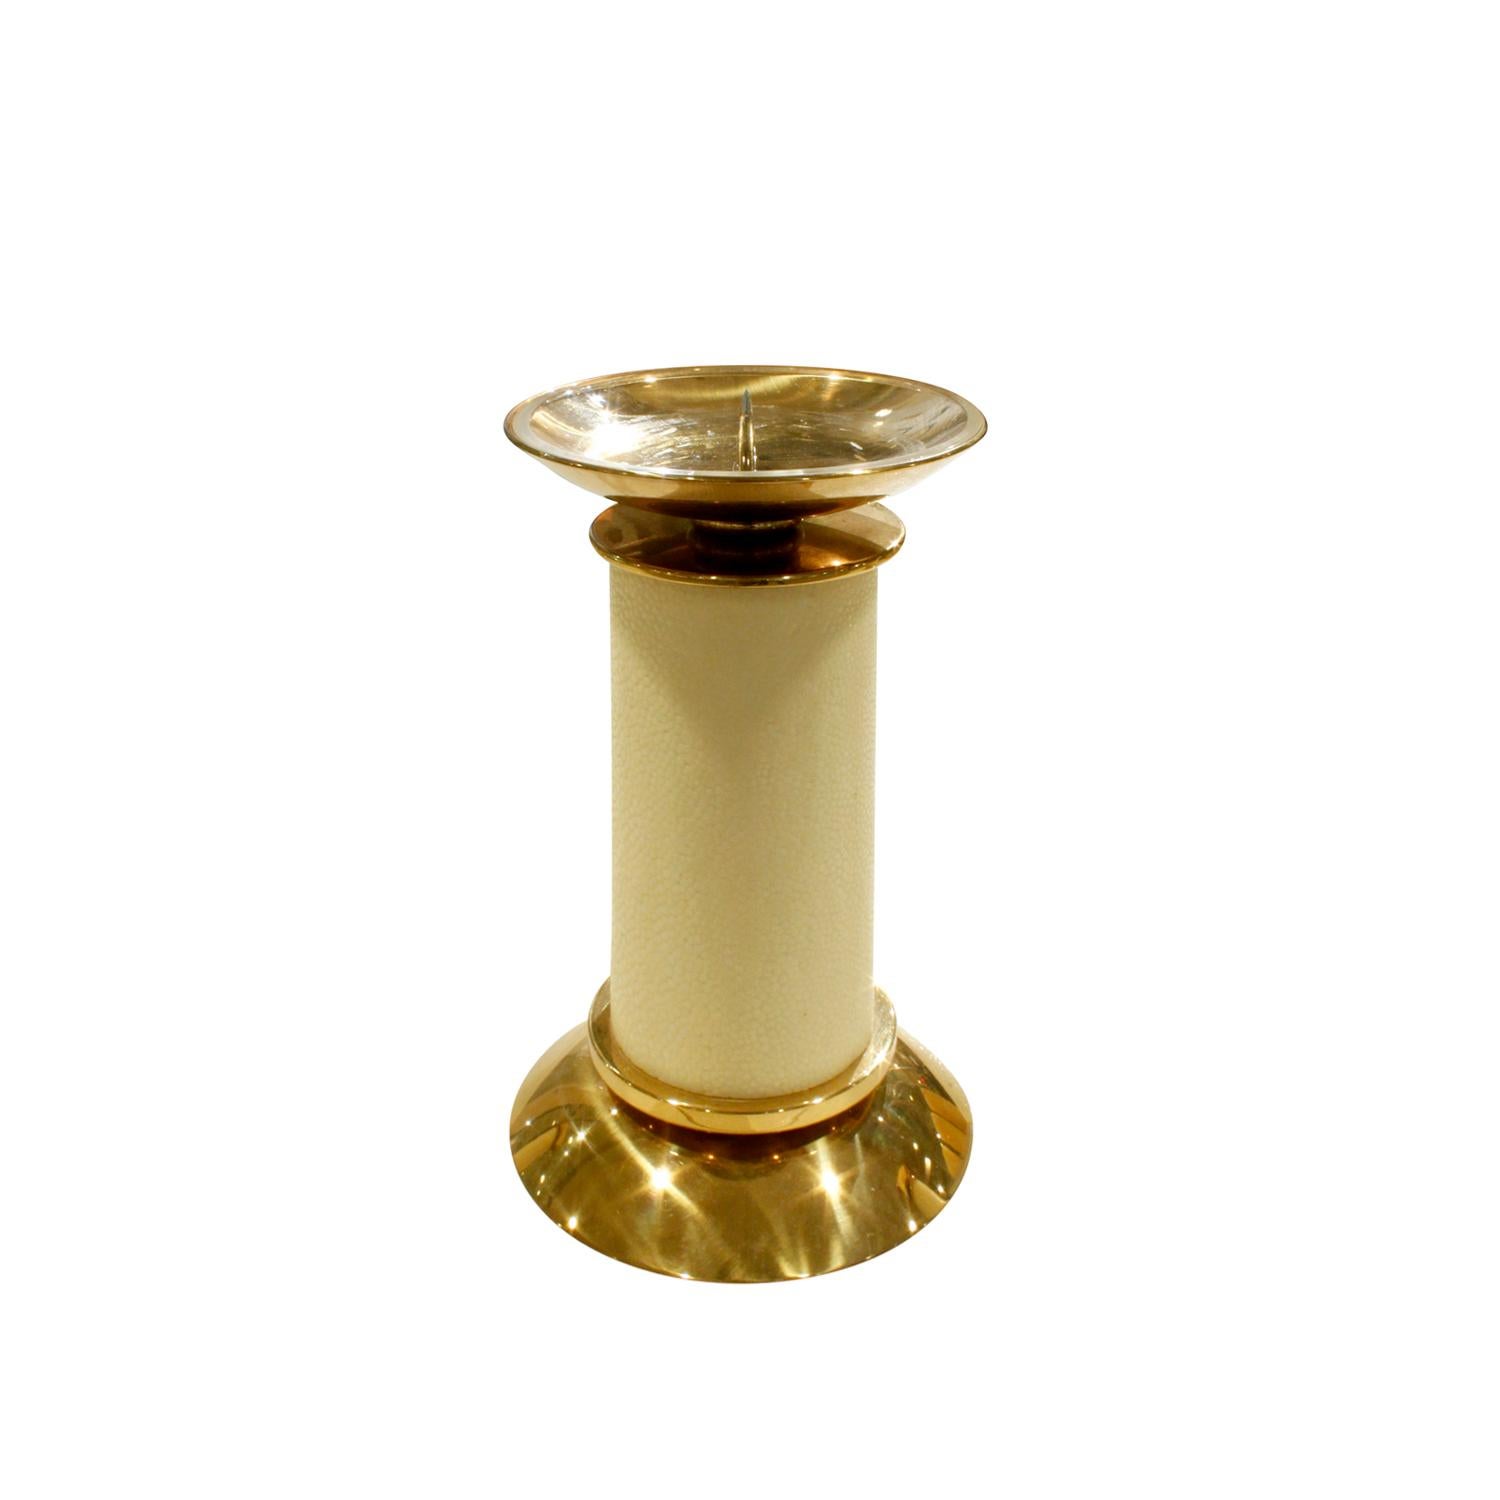 Hand-Crafted Karl Springer Exceptional Set of 3 Candle Holders in Brass and Shagreen, 1980s